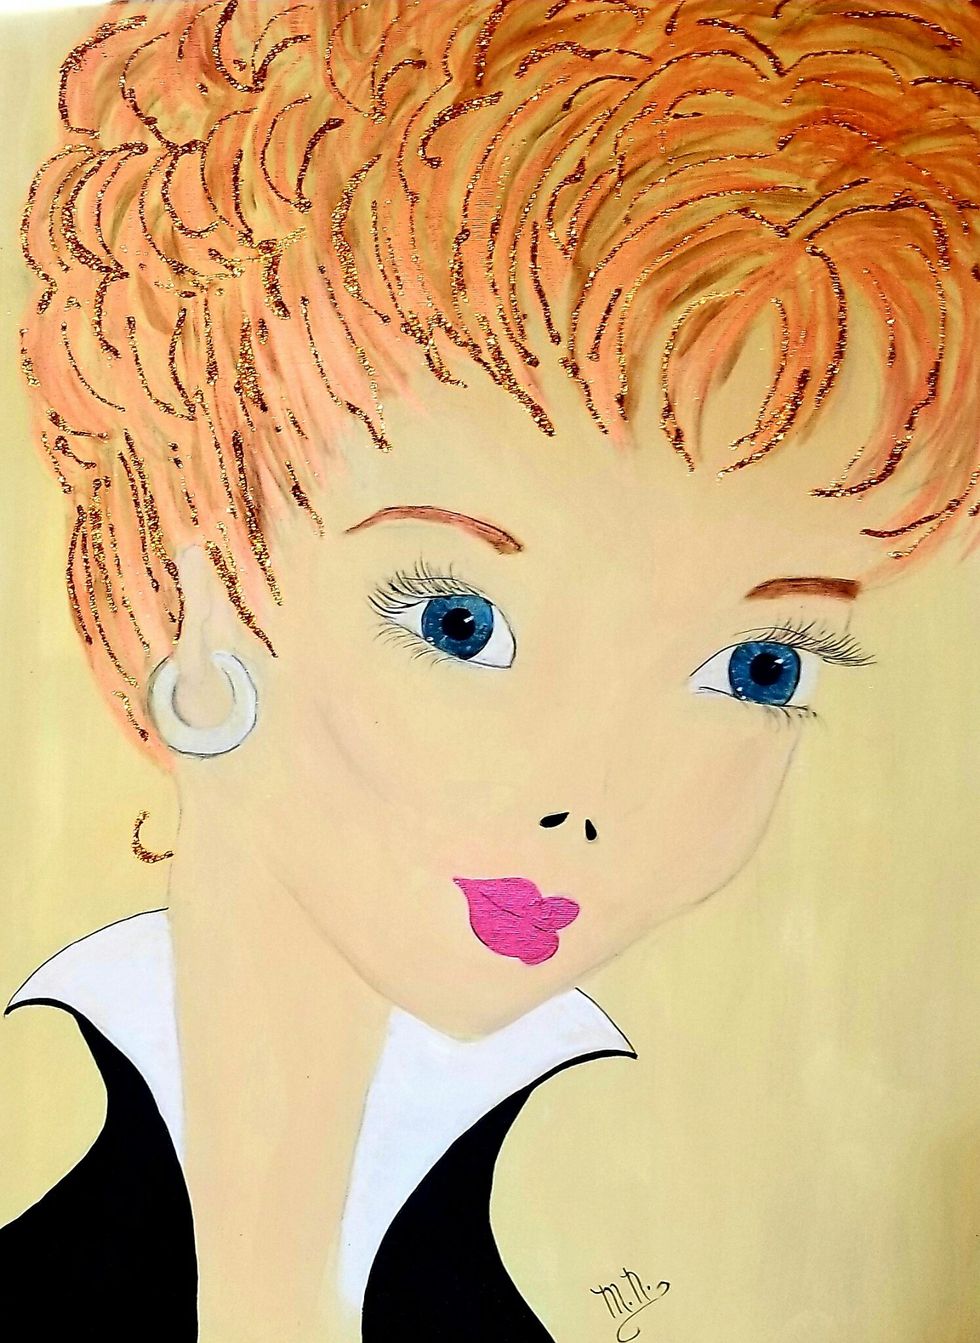 Millerton library loves ‘Lucy’ art